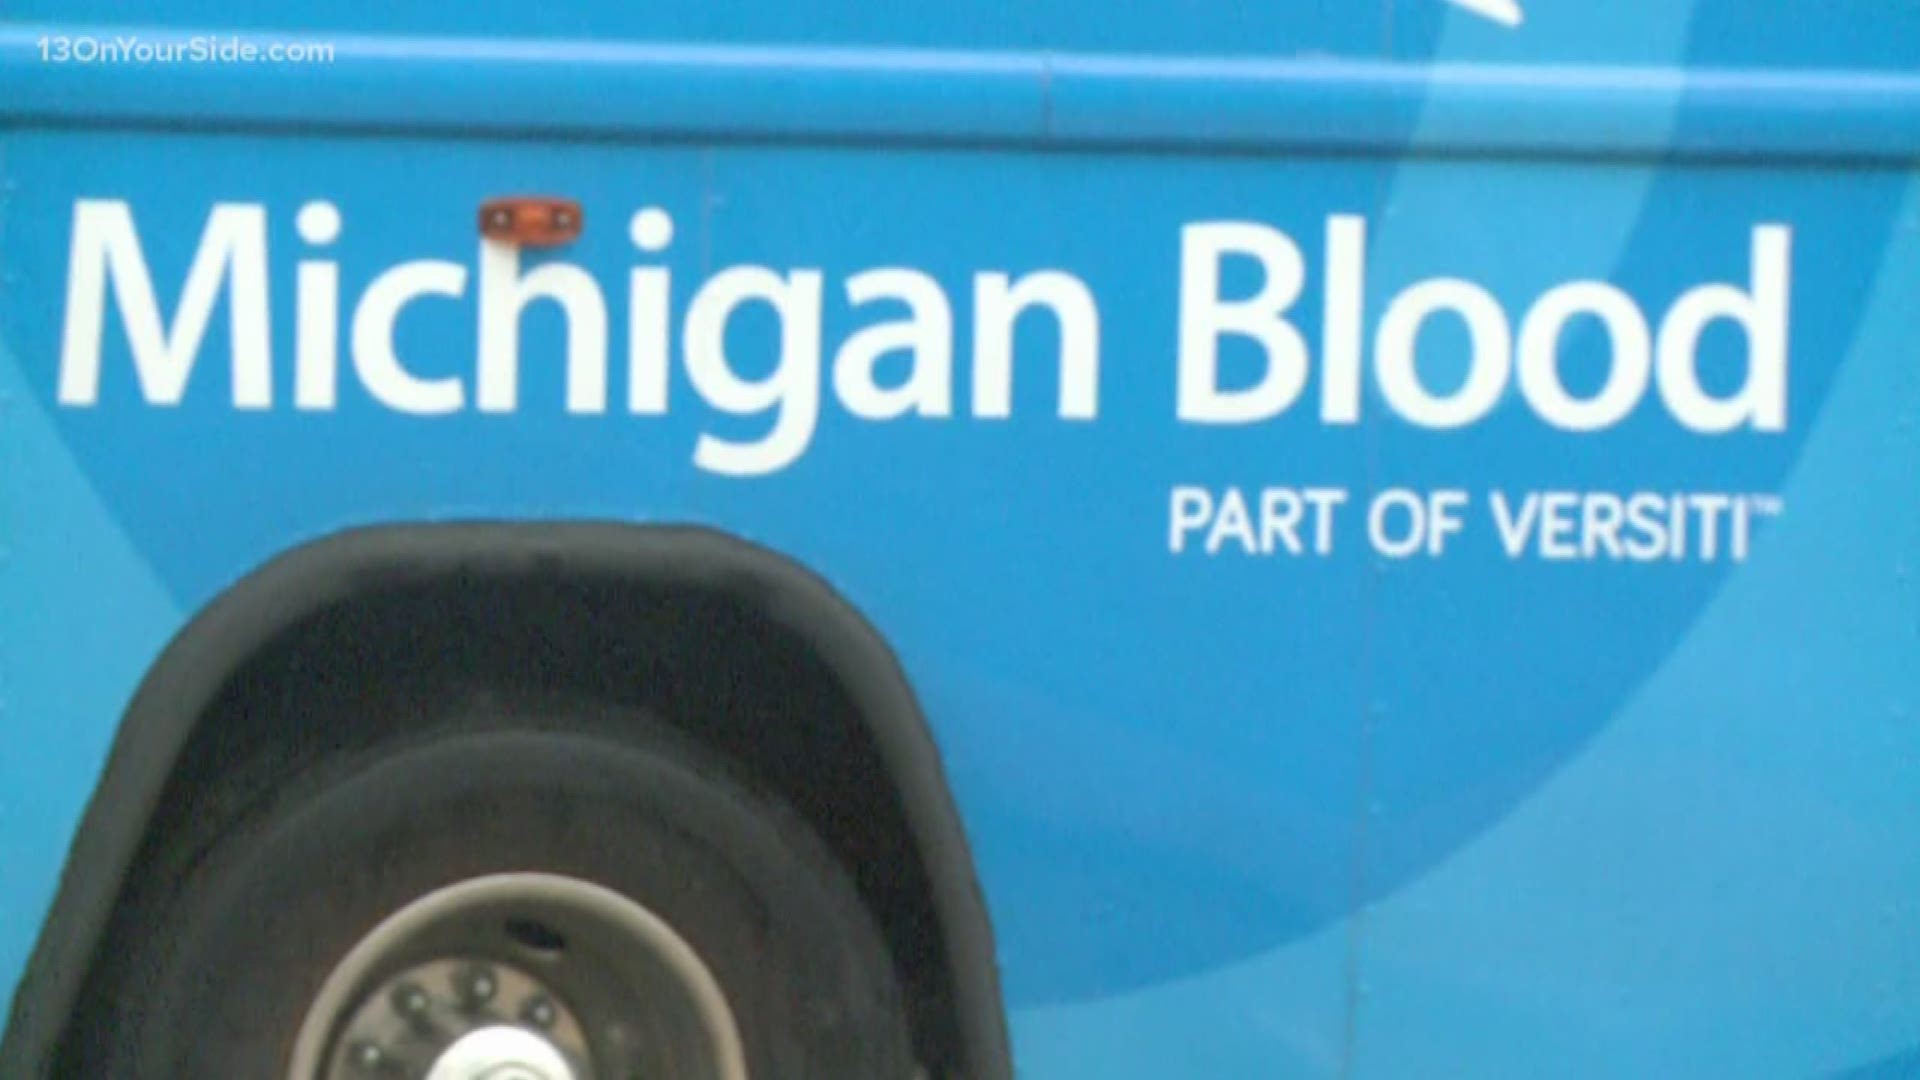 Michigan's blood supply is at "dangerously low levels."